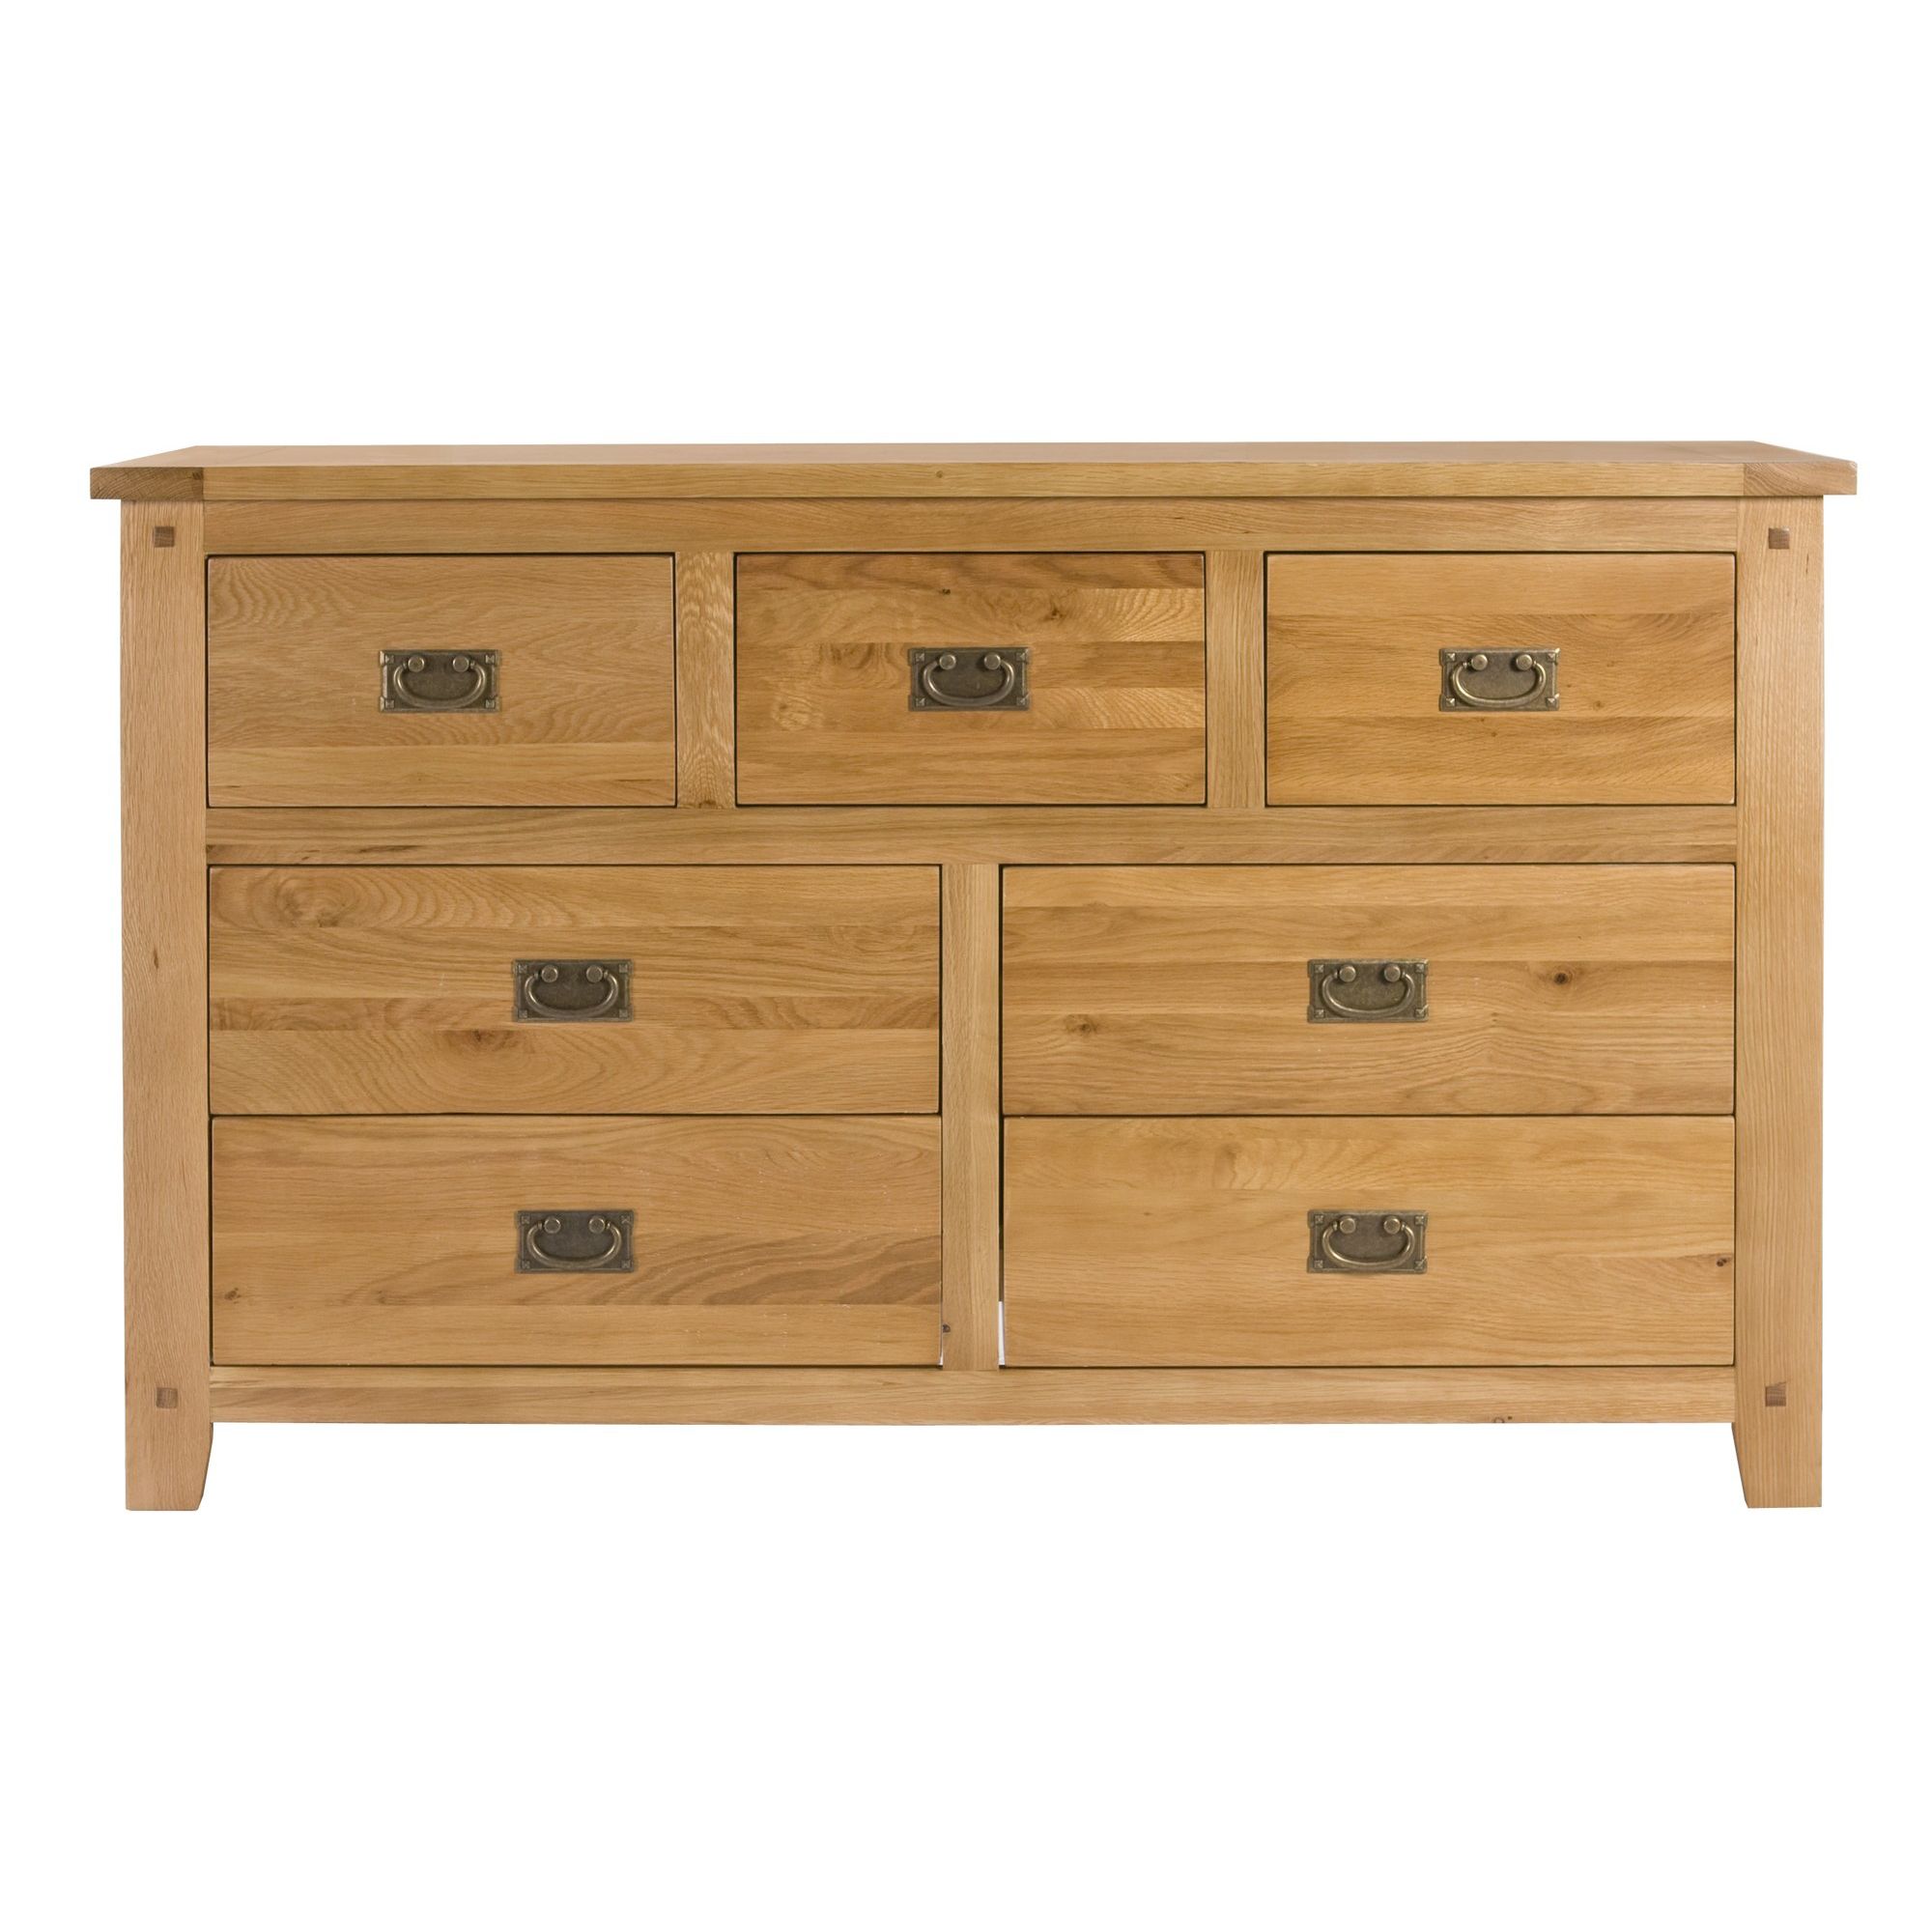 Elements Brunswick Bedroom Seven Drawer Wide Chest in Warm Lacquer at Tesco Direct